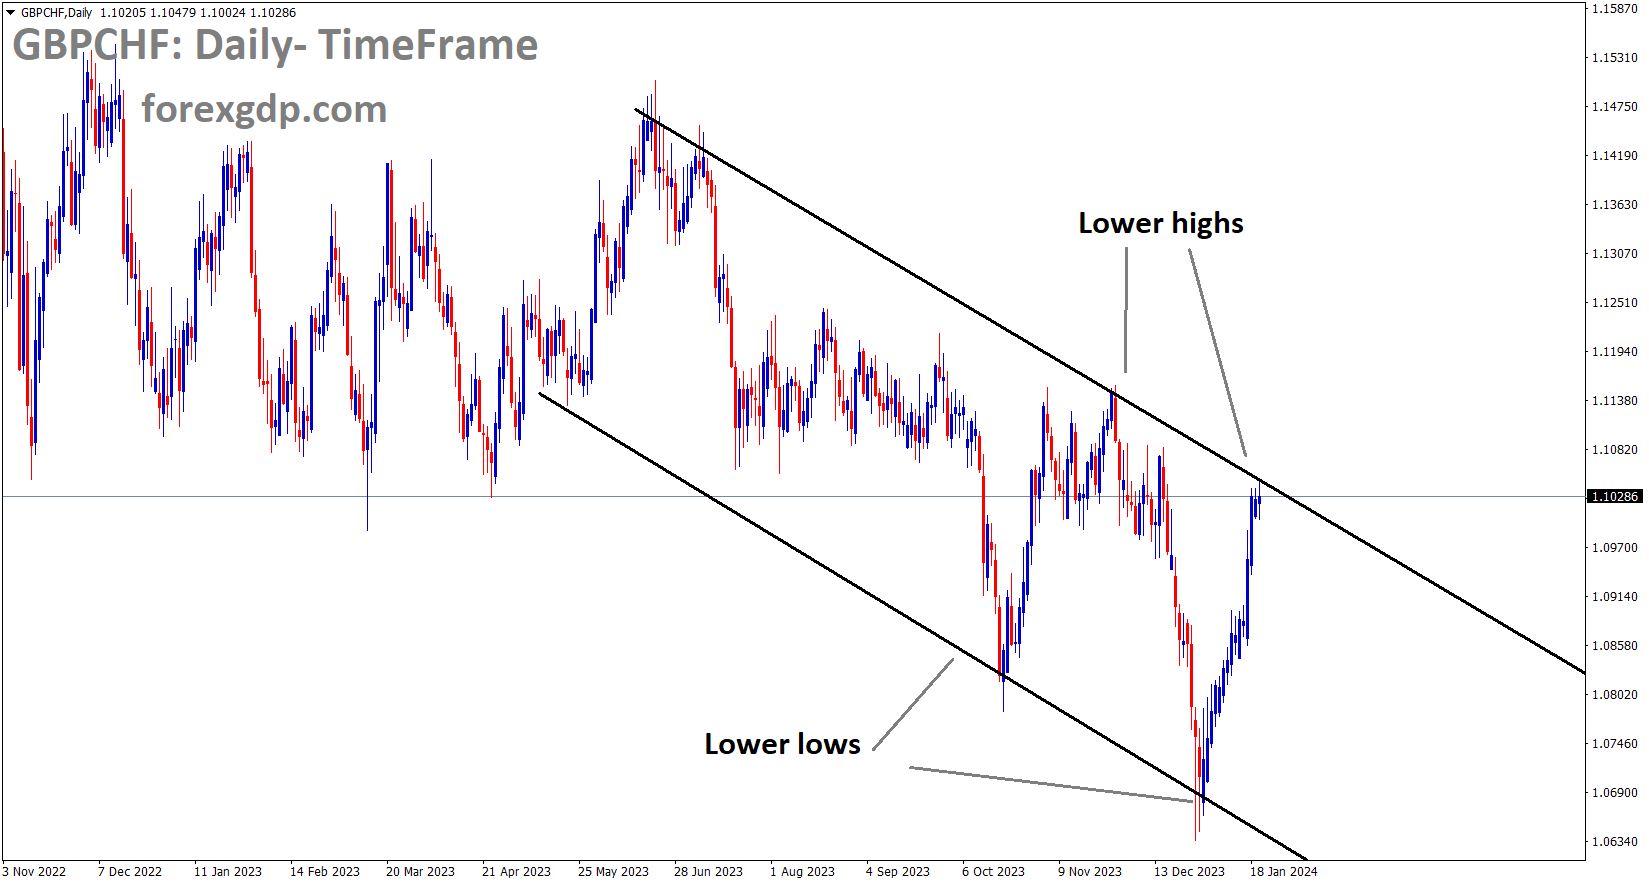 GBPCHF is moving in the Descending channel and the market has reached the lower high area of the channel